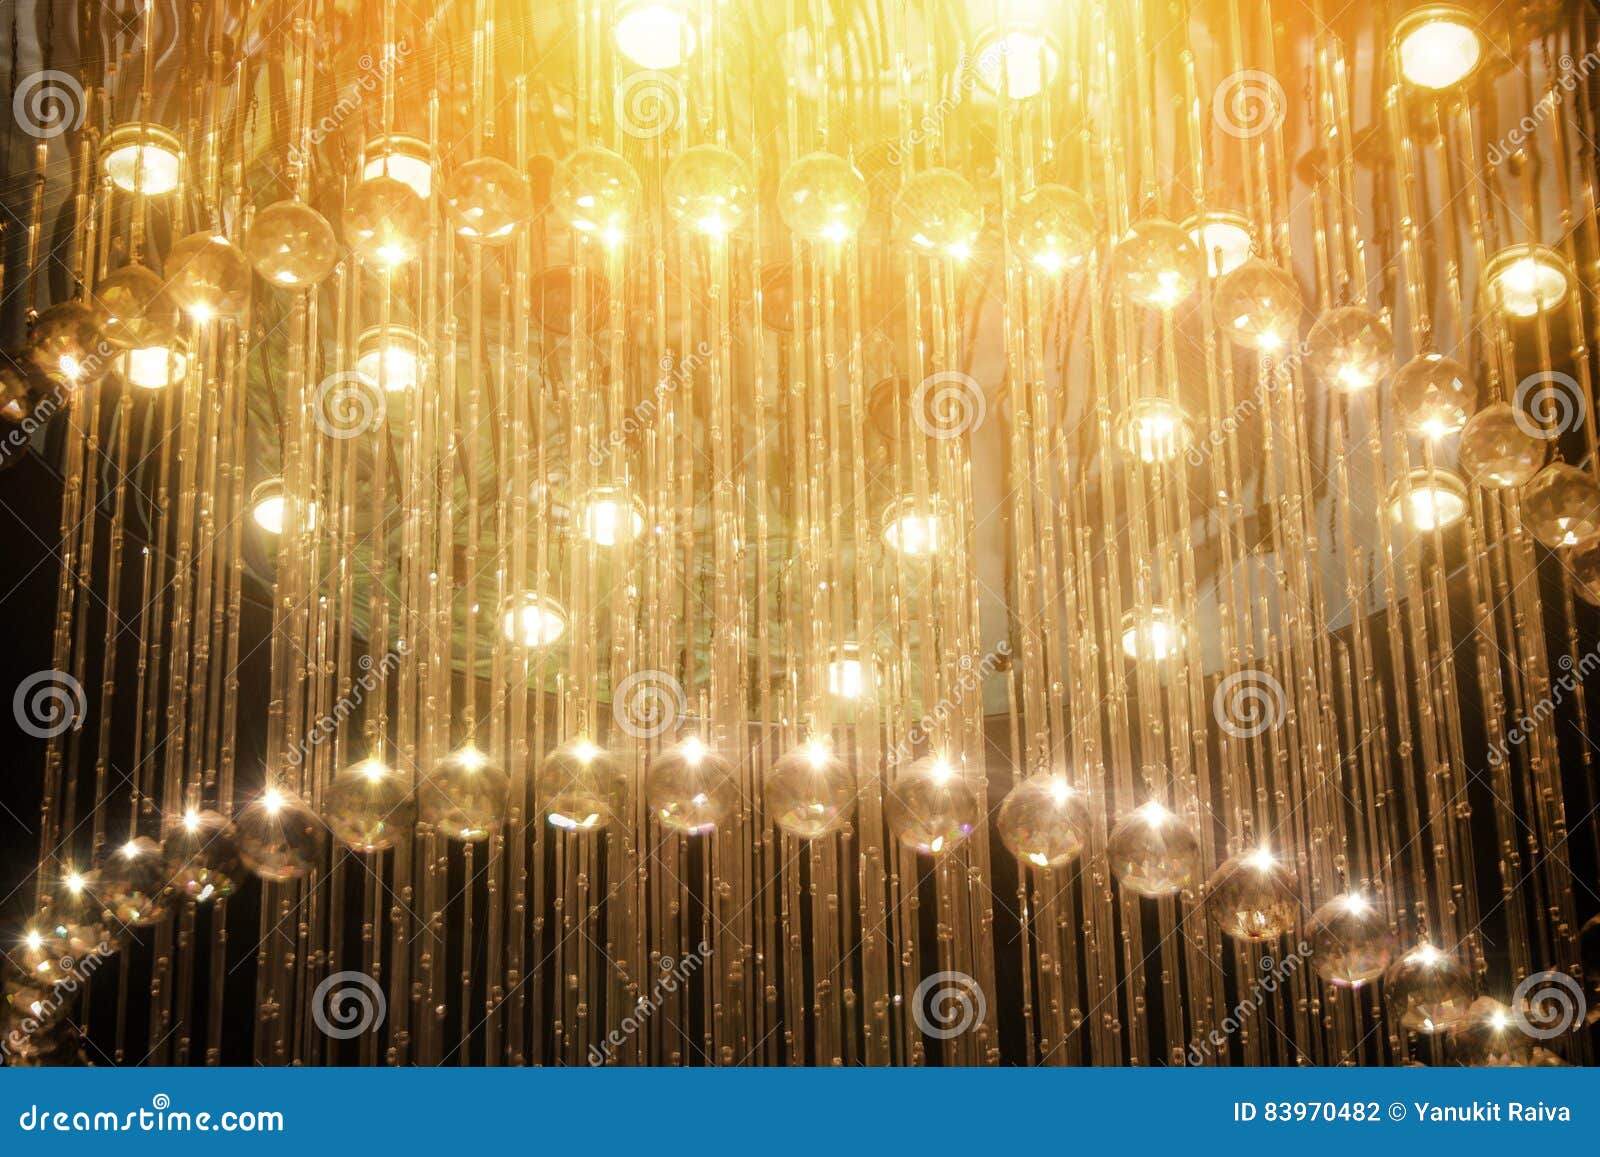 Daimond Daimiond Chandelier Shining Stock Photo - Image of interior ...